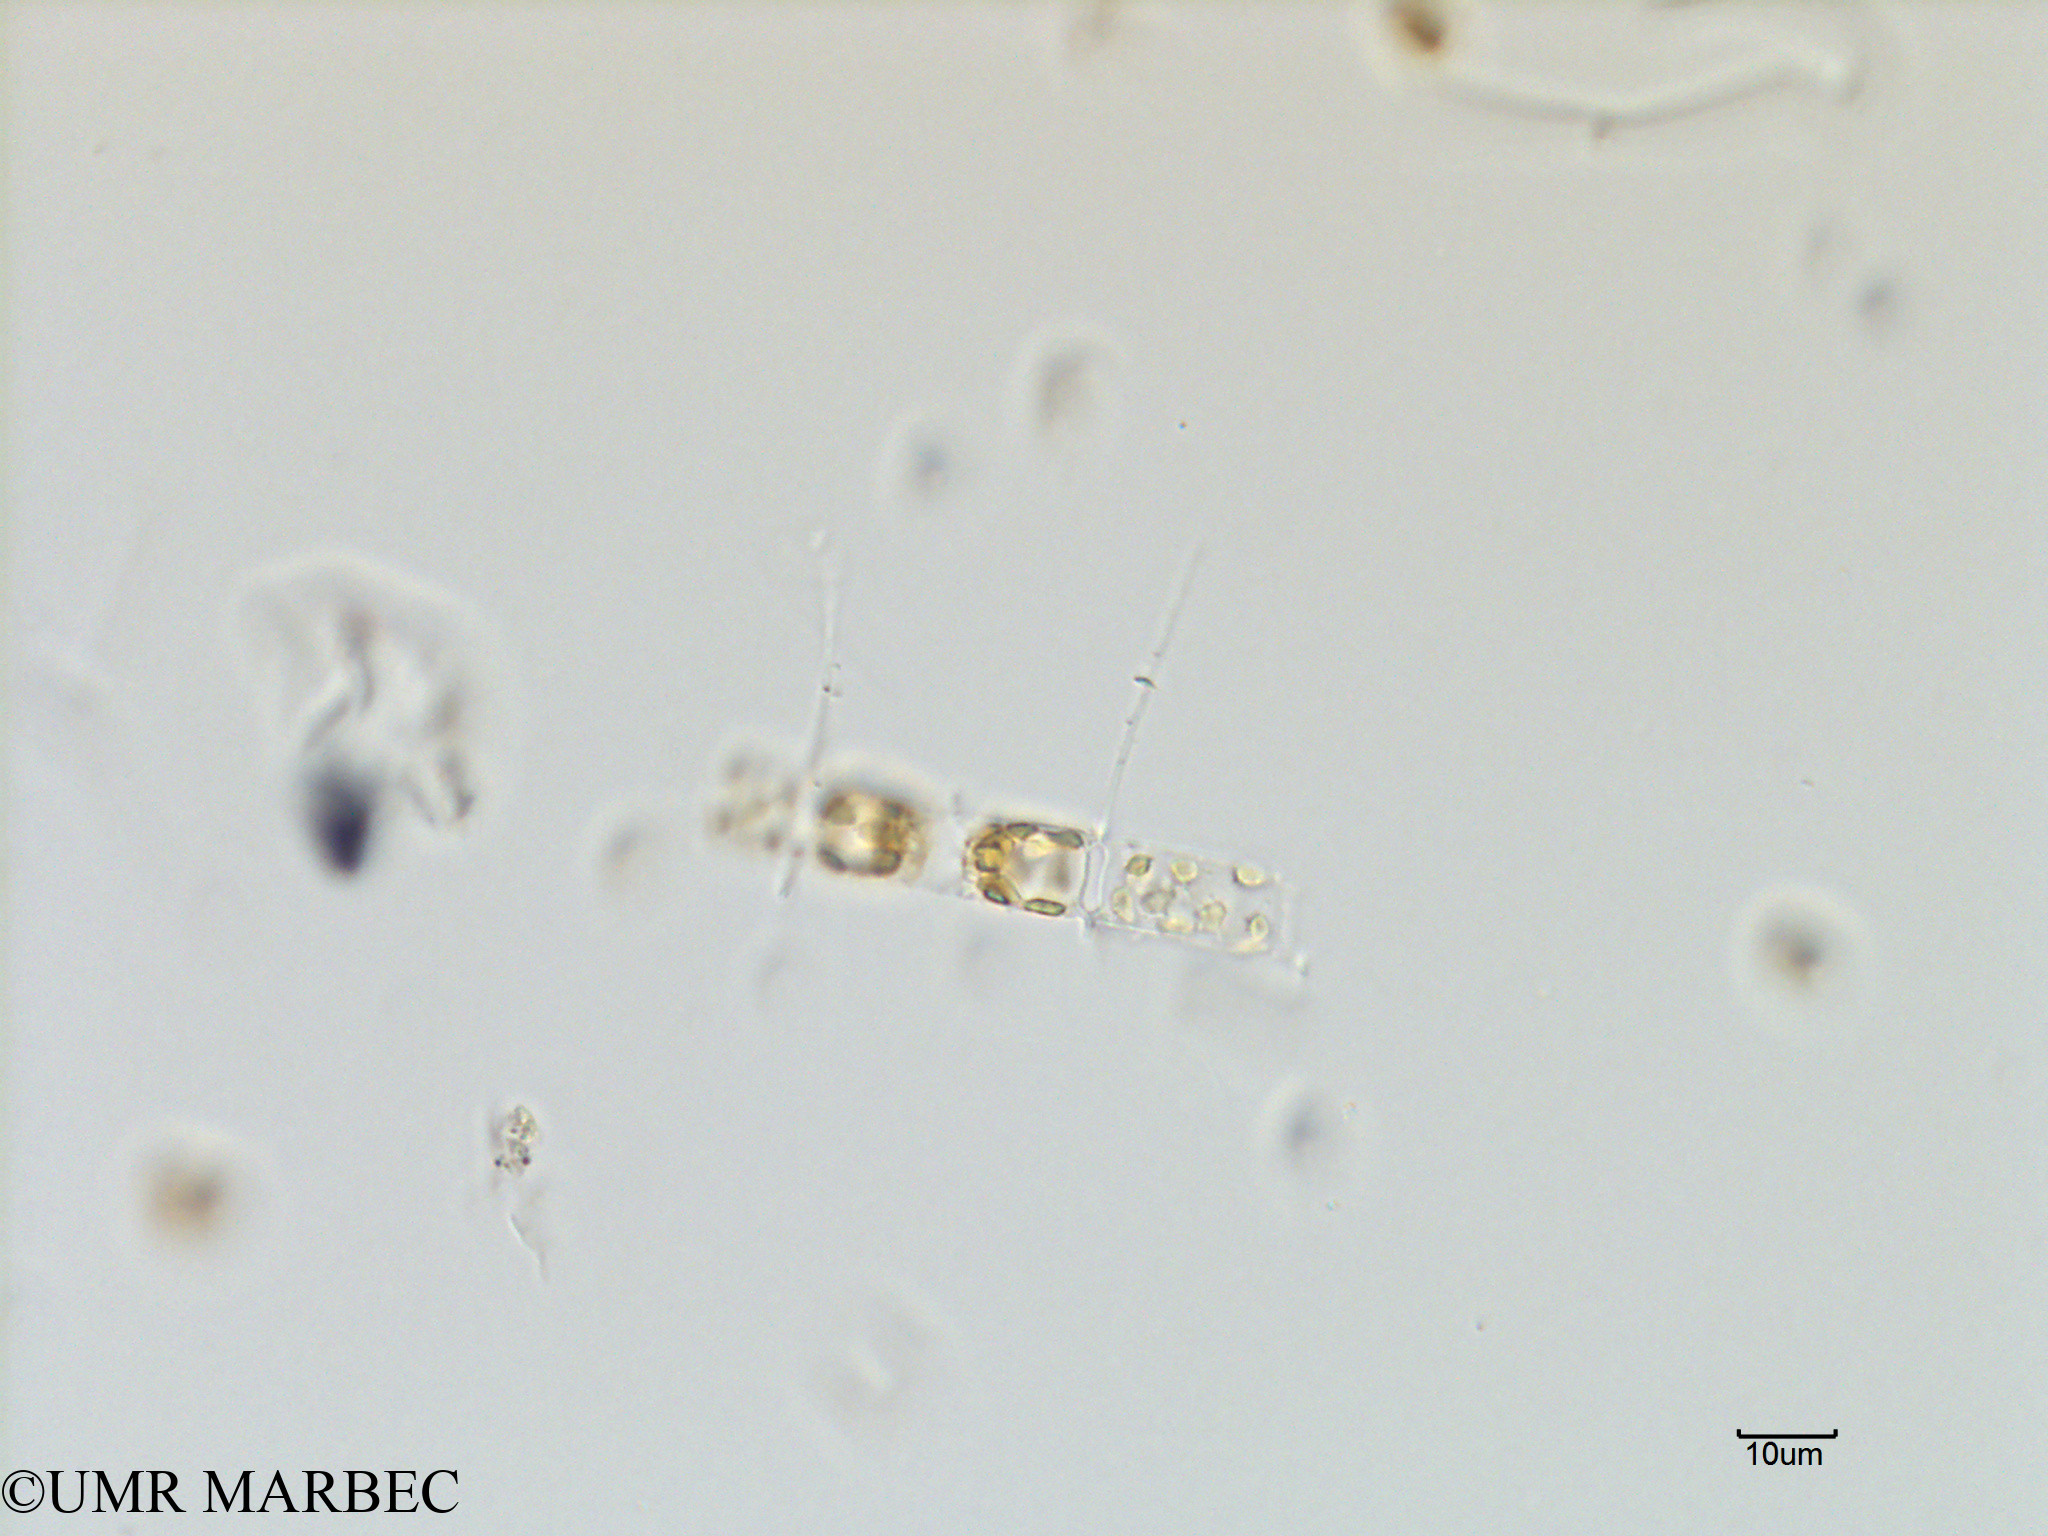 phyto/Scattered_Islands/mayotte_lagoon/SIREME May 2016/Chaetoceros sp8 (MAY3_chaetoceros_4-1).tif(copy).jpg